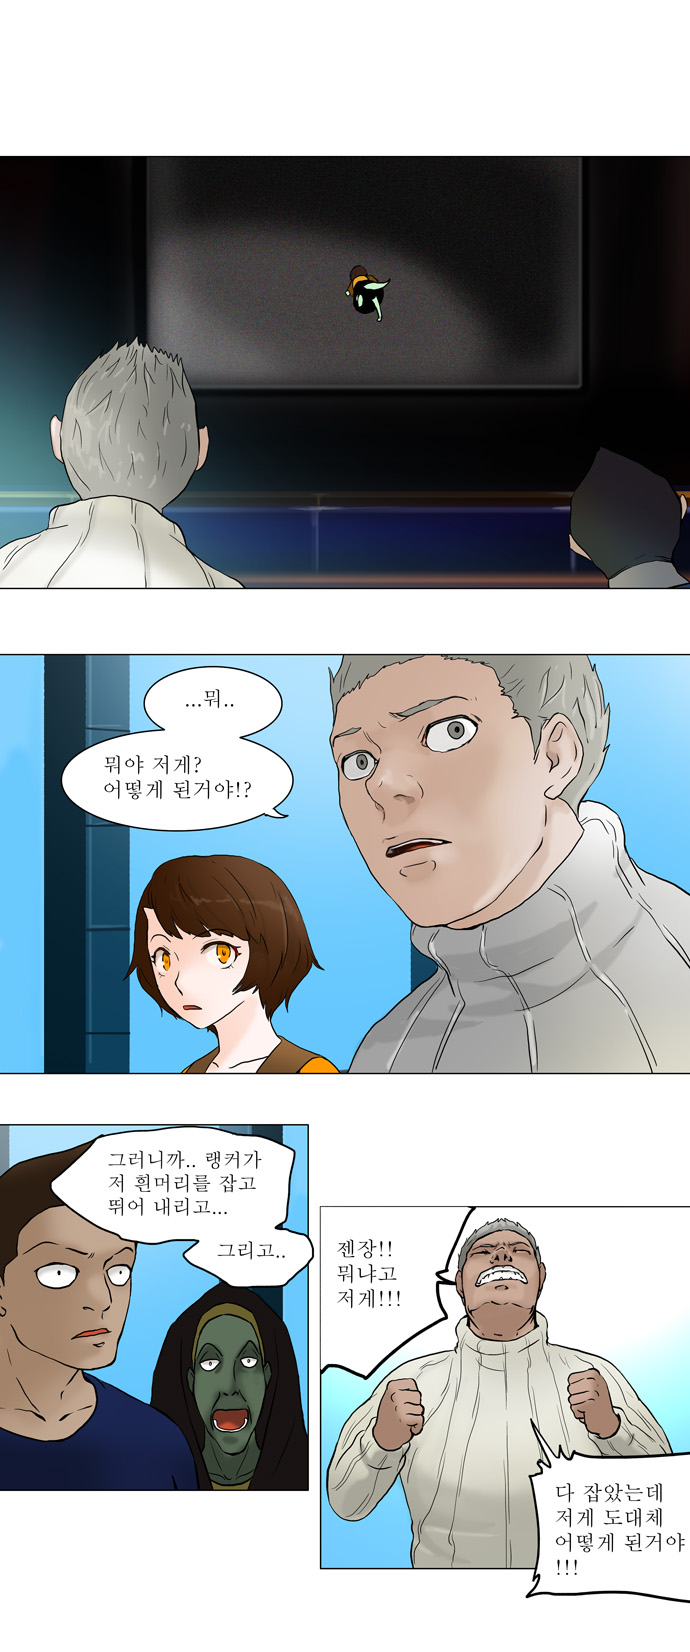 Tower of God - Chapter 42 - Page 1